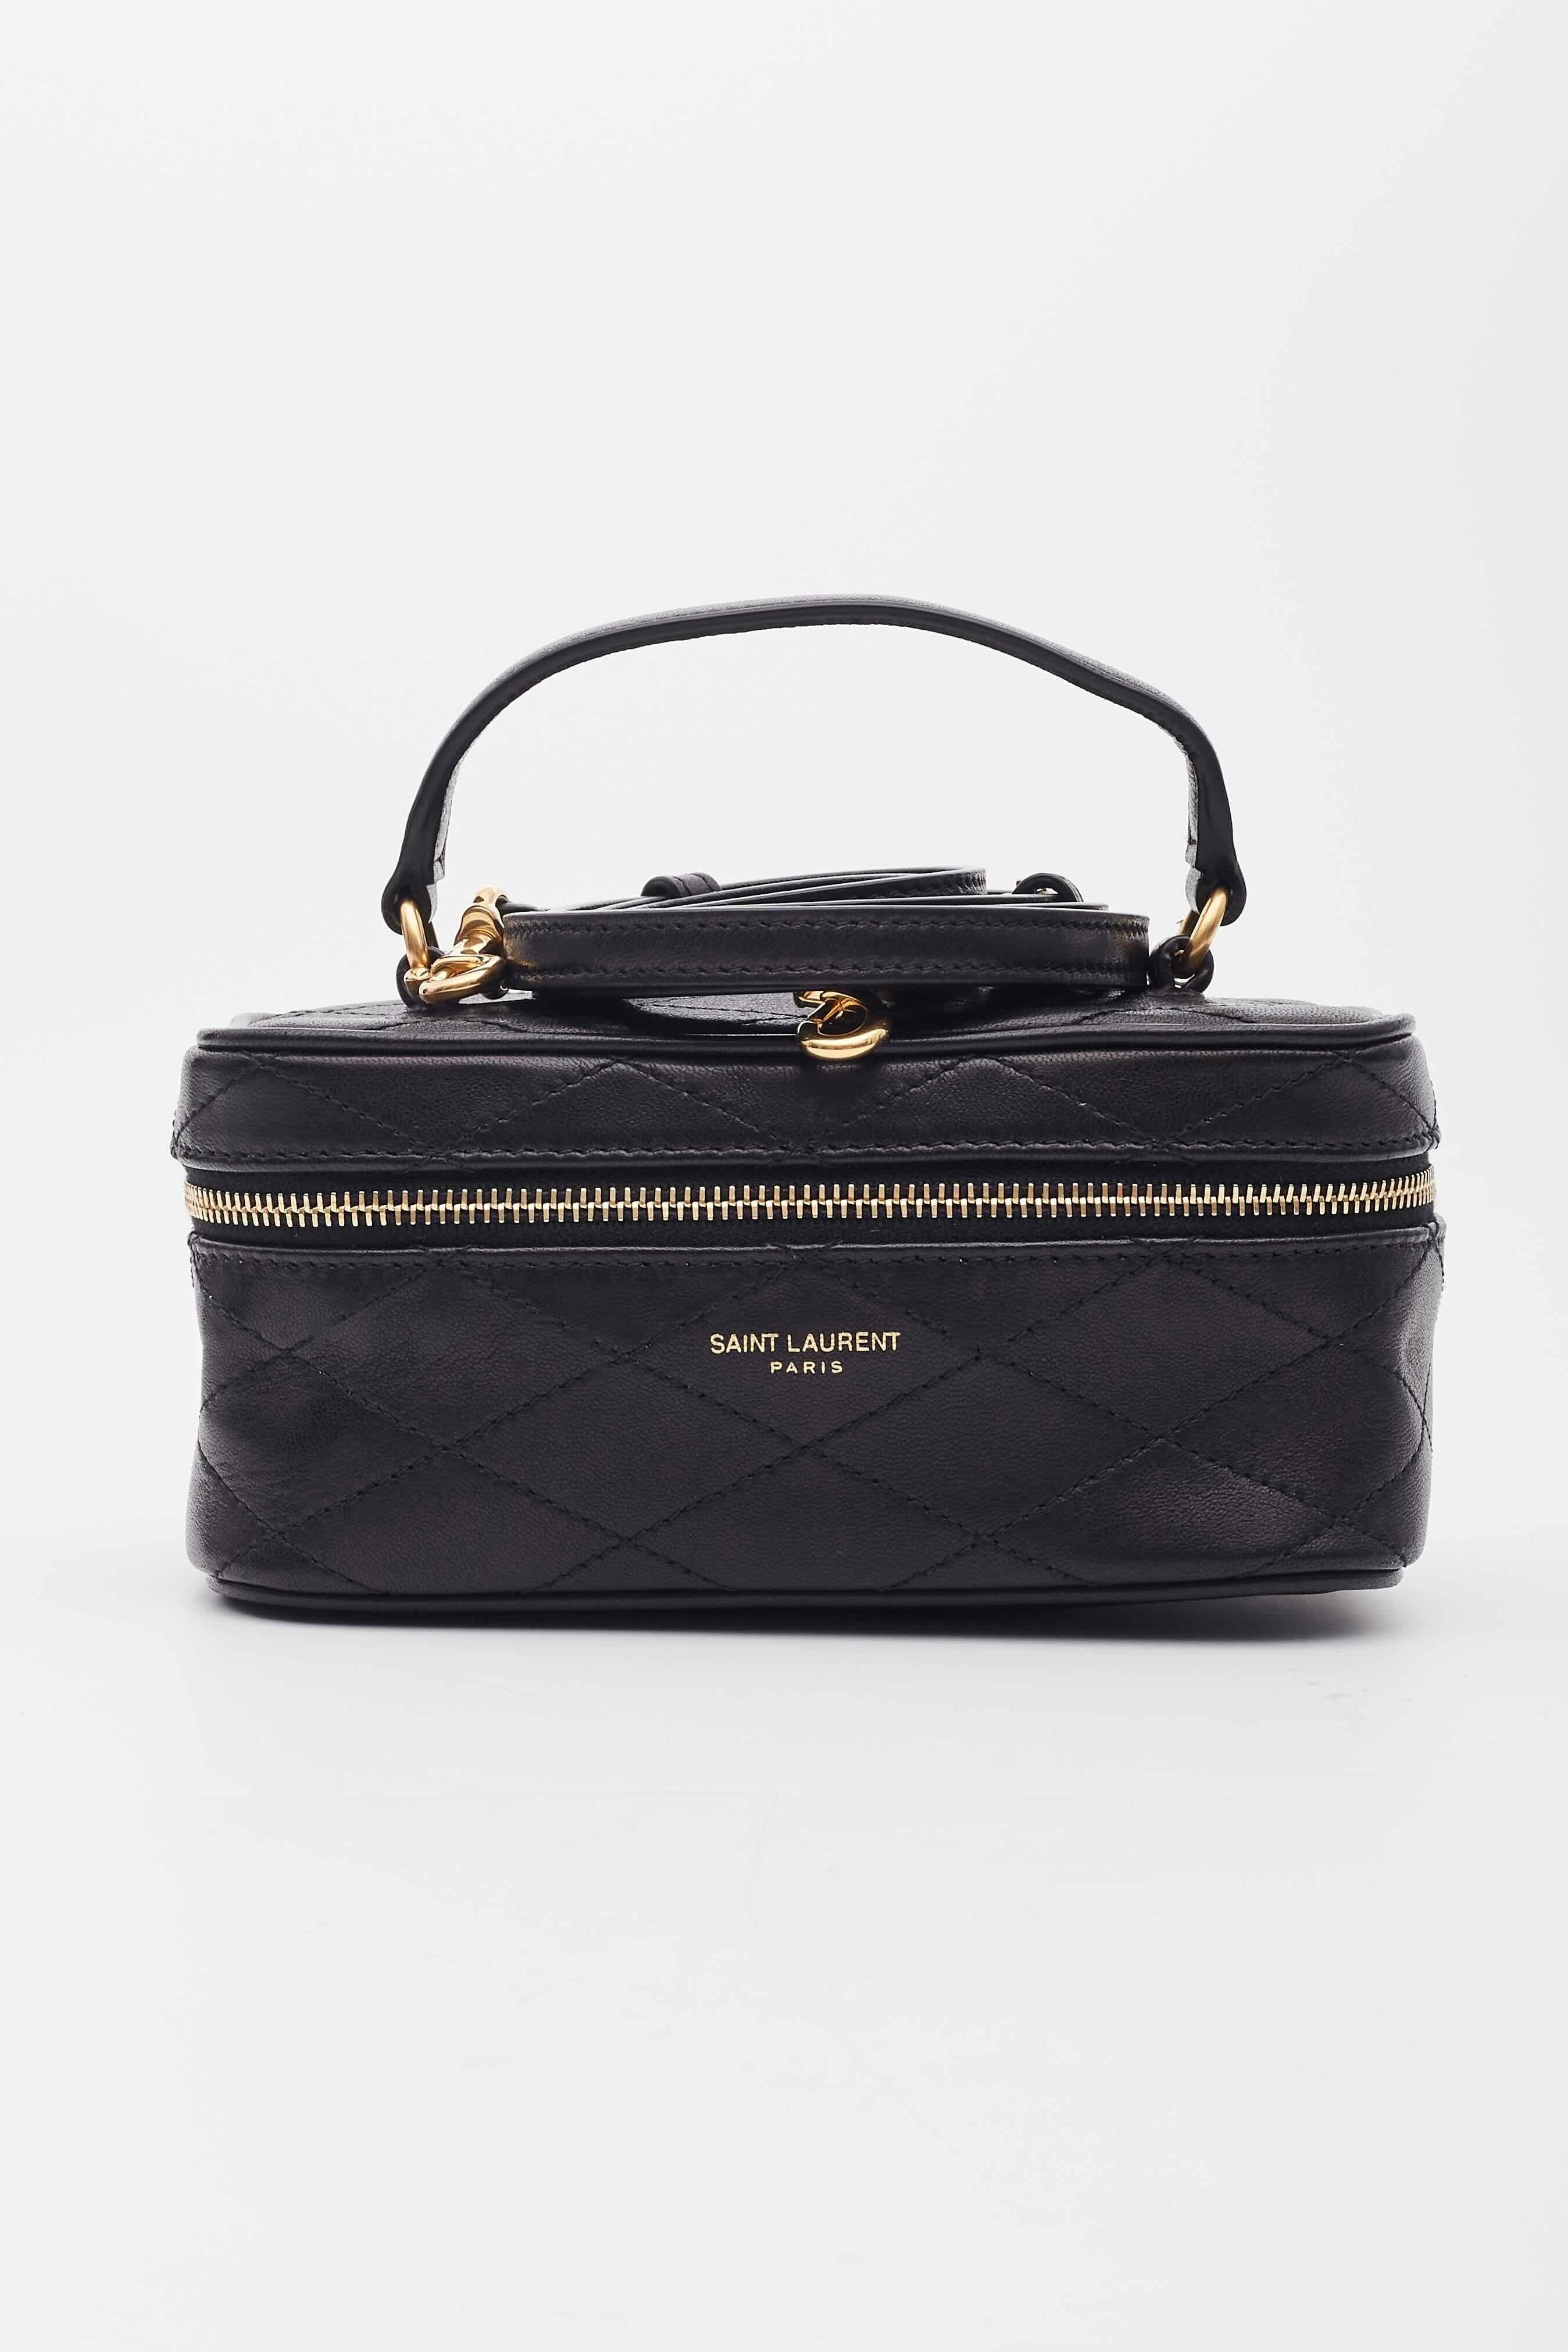  Color: Black
Material: Calfskin leather
Item Code: 669560
Measures: H 6.25” x L 6.25” x D 3.25”
Drop: 21” (shoulder strap) & 3” (handle)
Comes With: Dust bag
Condition: Excellent.
 
Made in Italy
